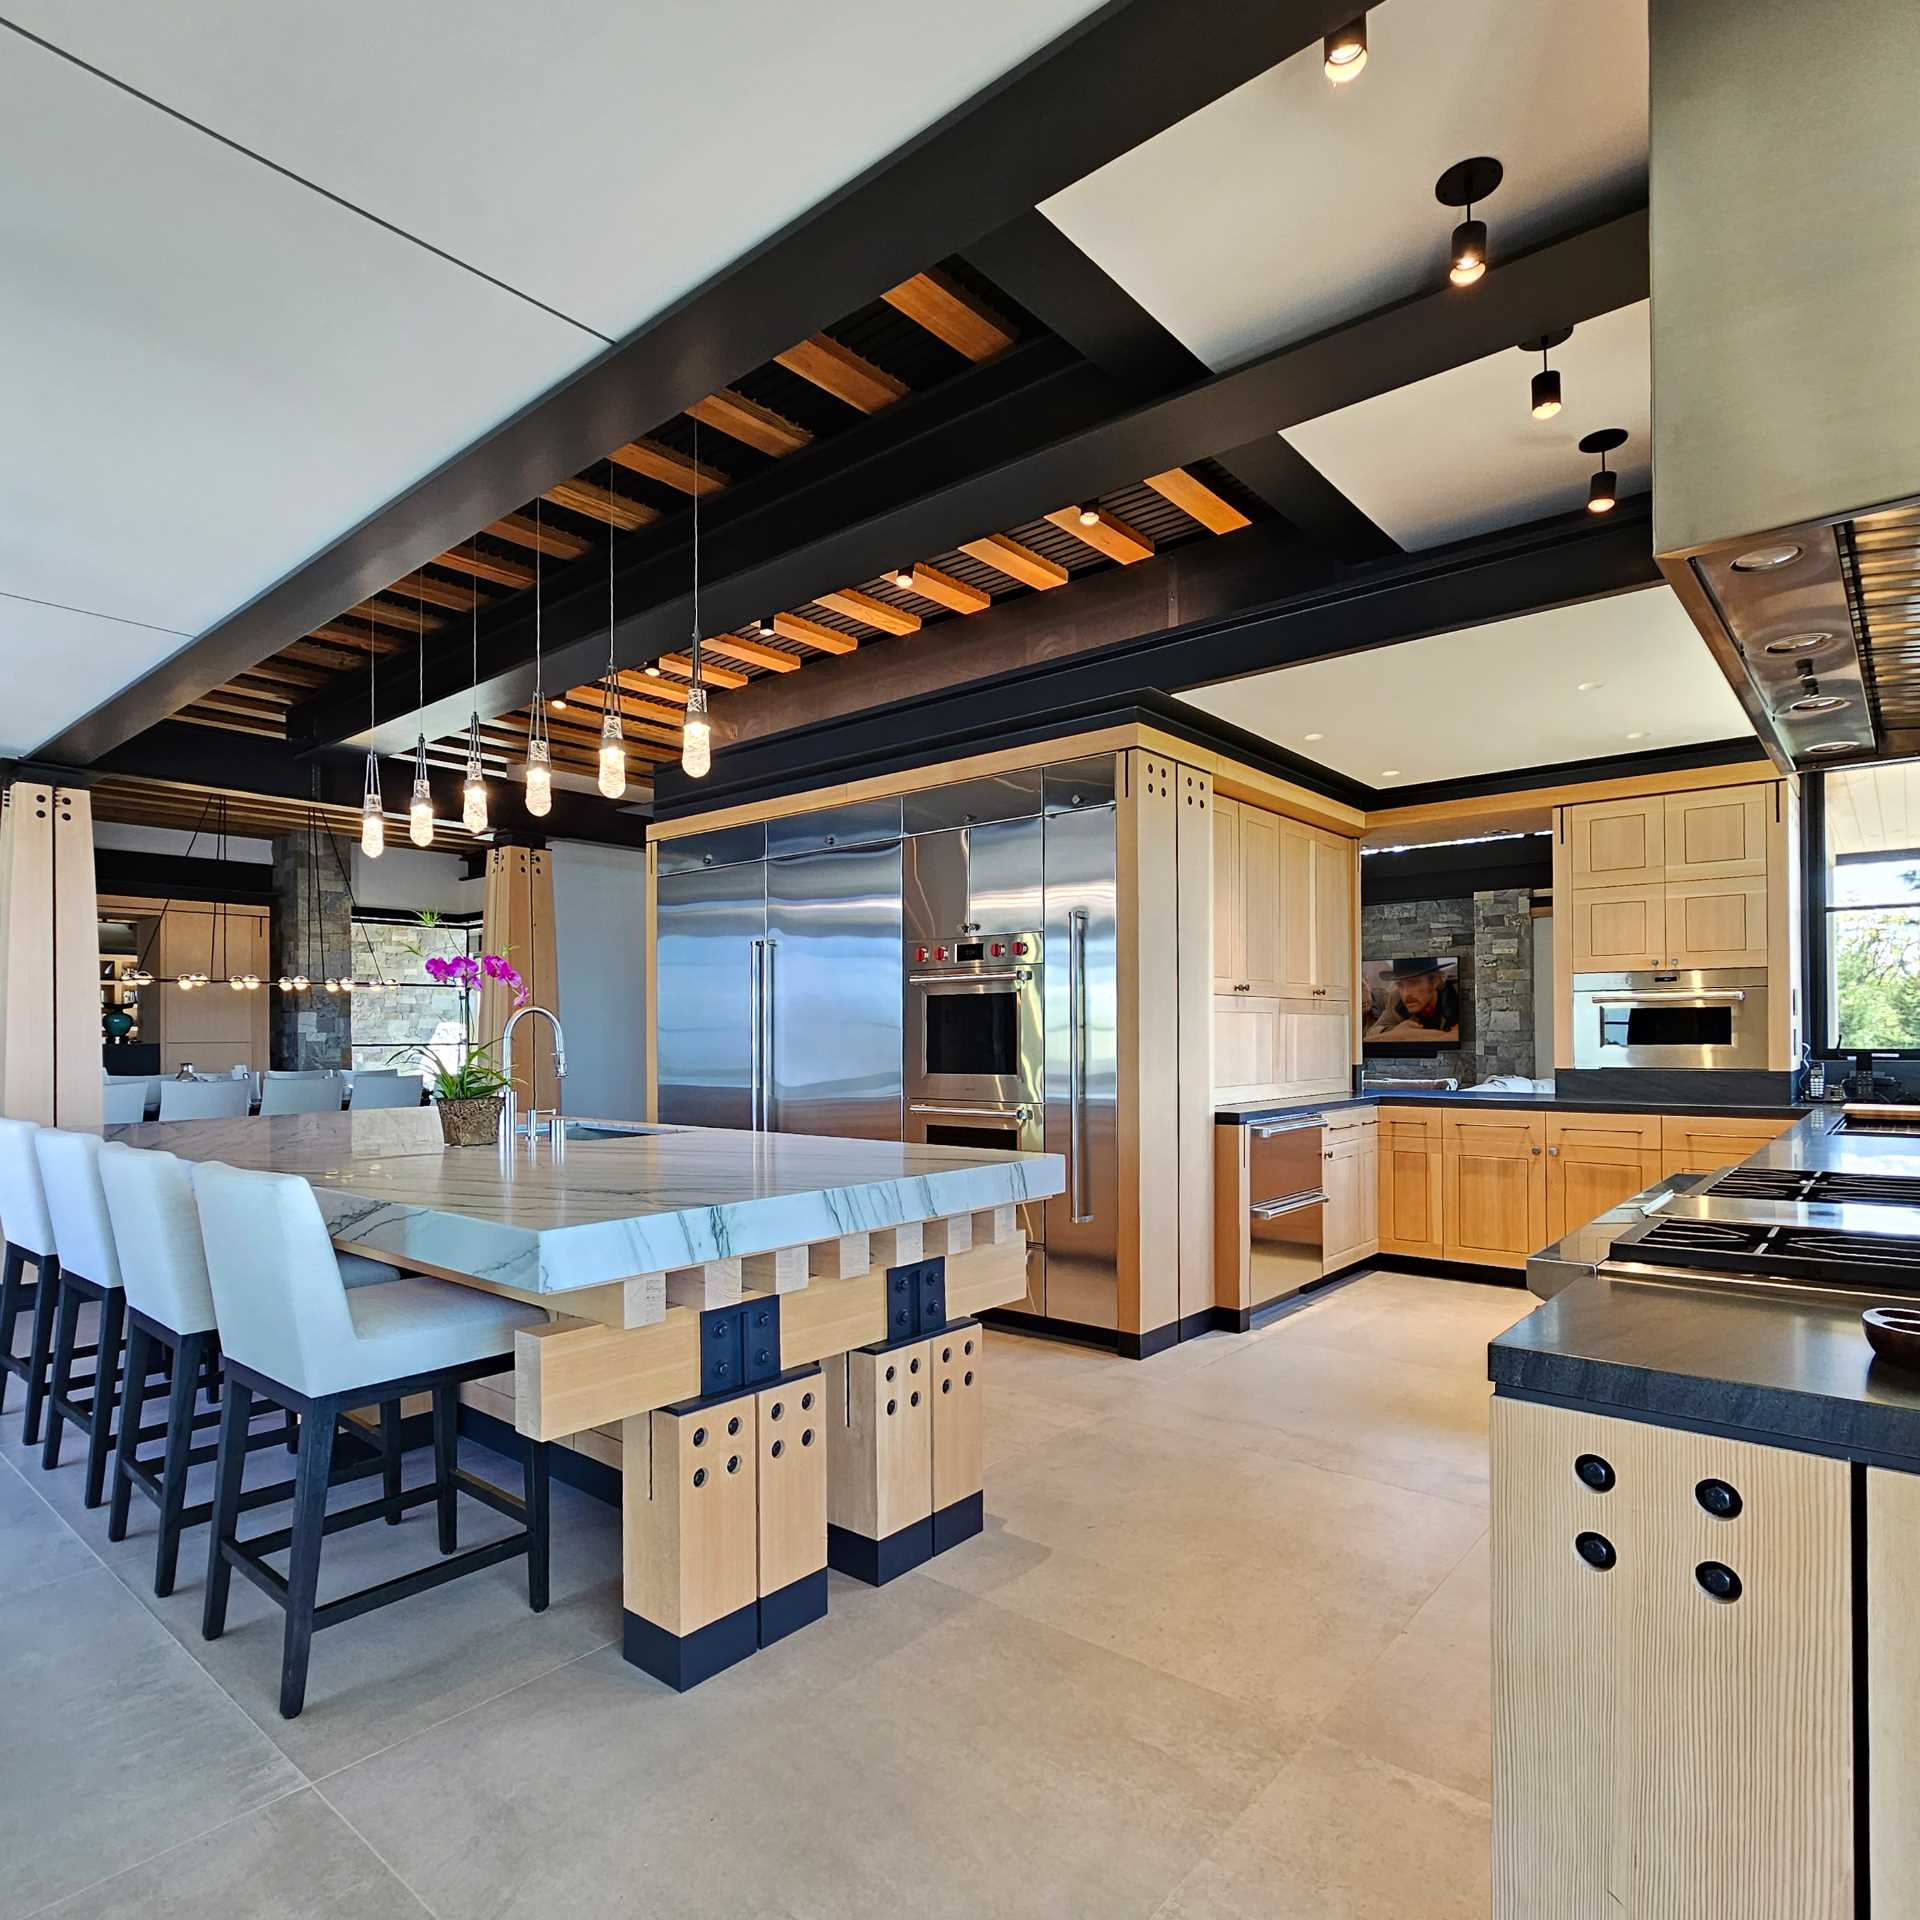 The focal point of this kitchen is the wood trestle center island that combines functionality with neo-rustic charm. Its robust presence serves as both a culinary workspace and a social hub. 